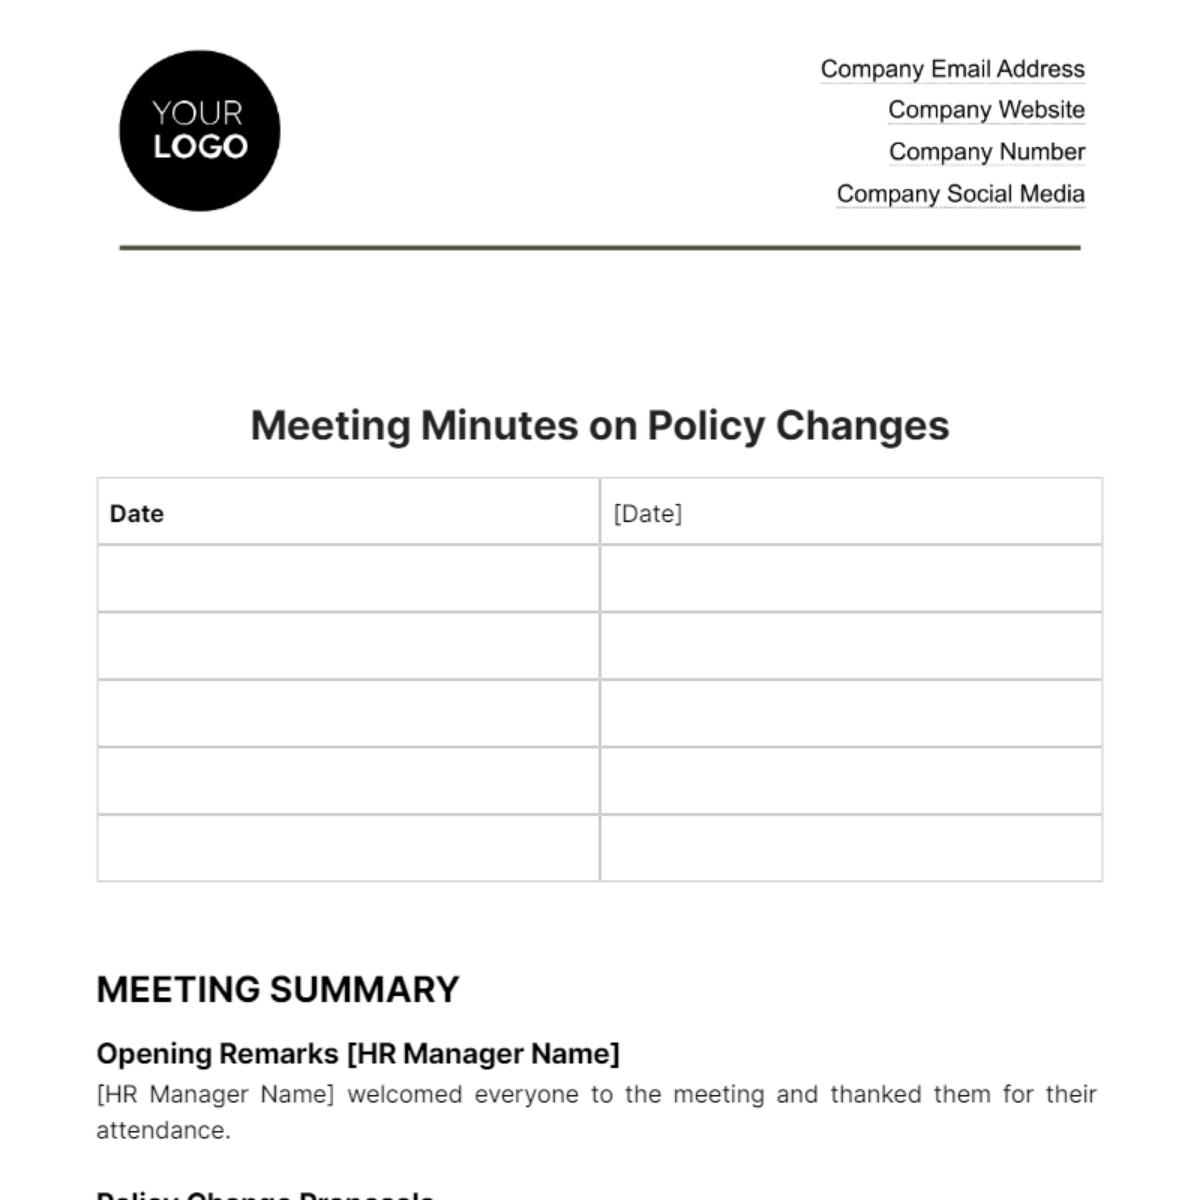 Free Meeting Minutes on Policy Changes HR Template